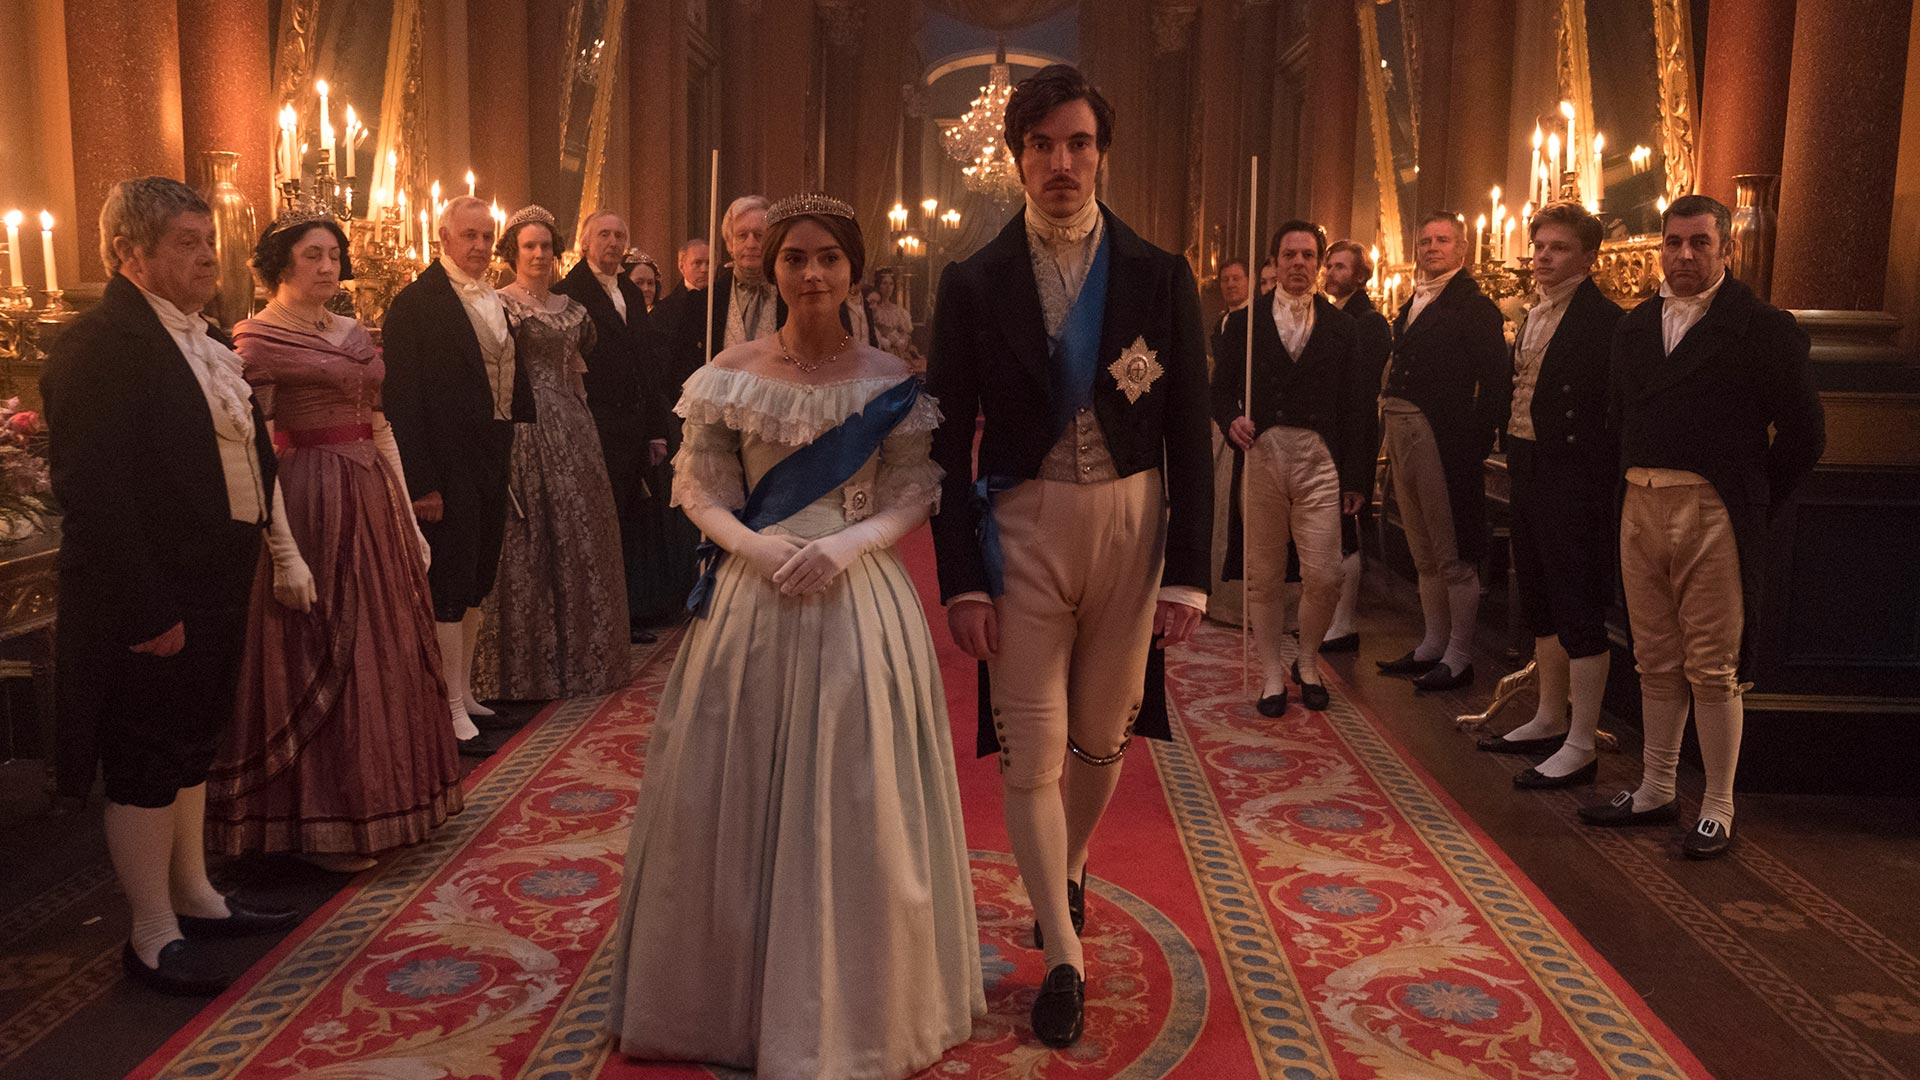  Jenna Coleman as Victoria and Tom Hughes as Prince Albert